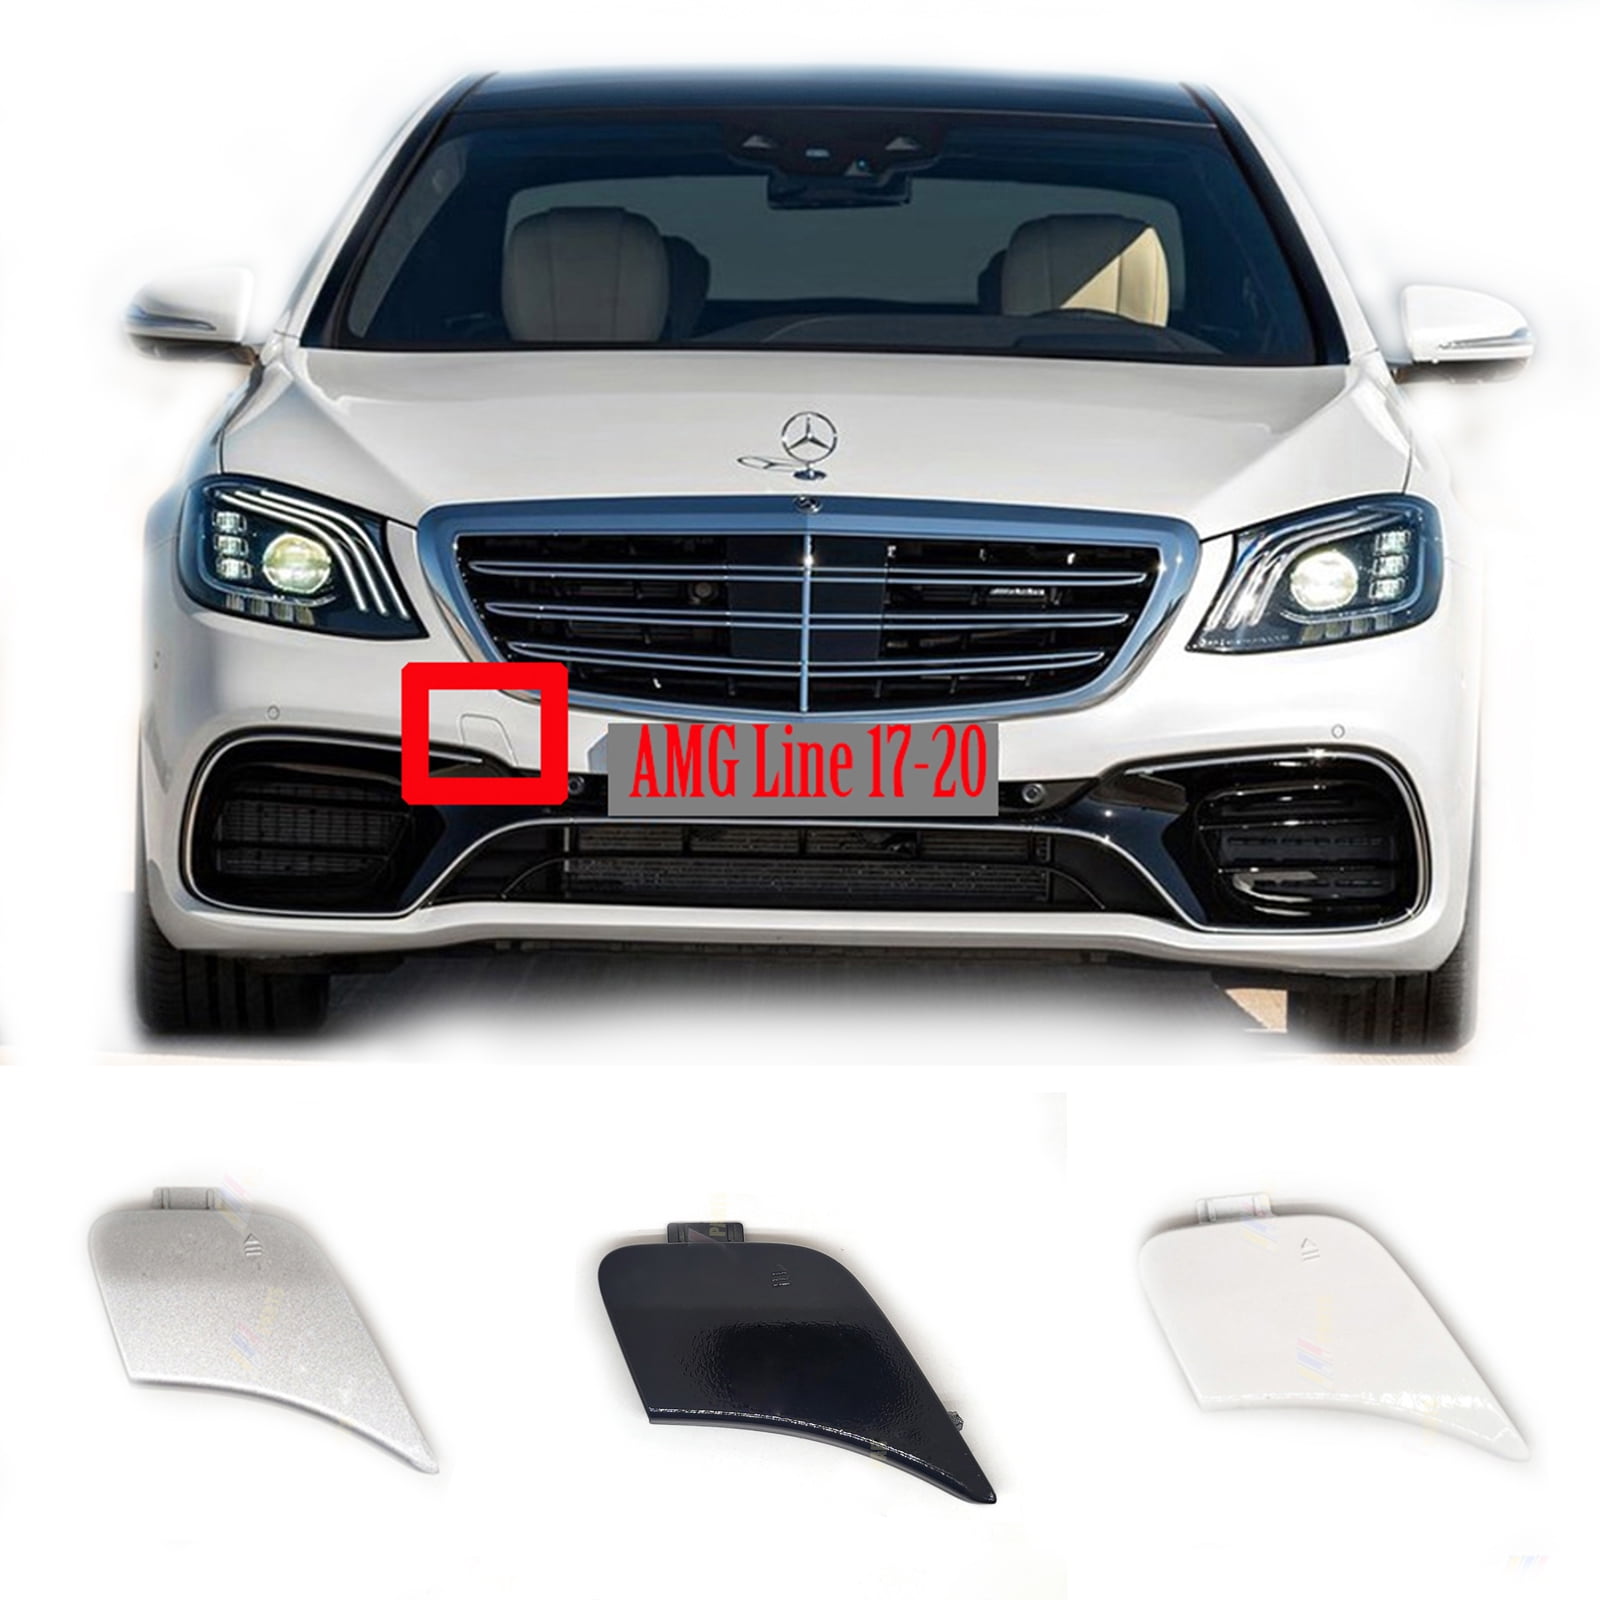 Trimla Front Tow Cover Fit 17-21 Mercedes-AMG S Class W222 for